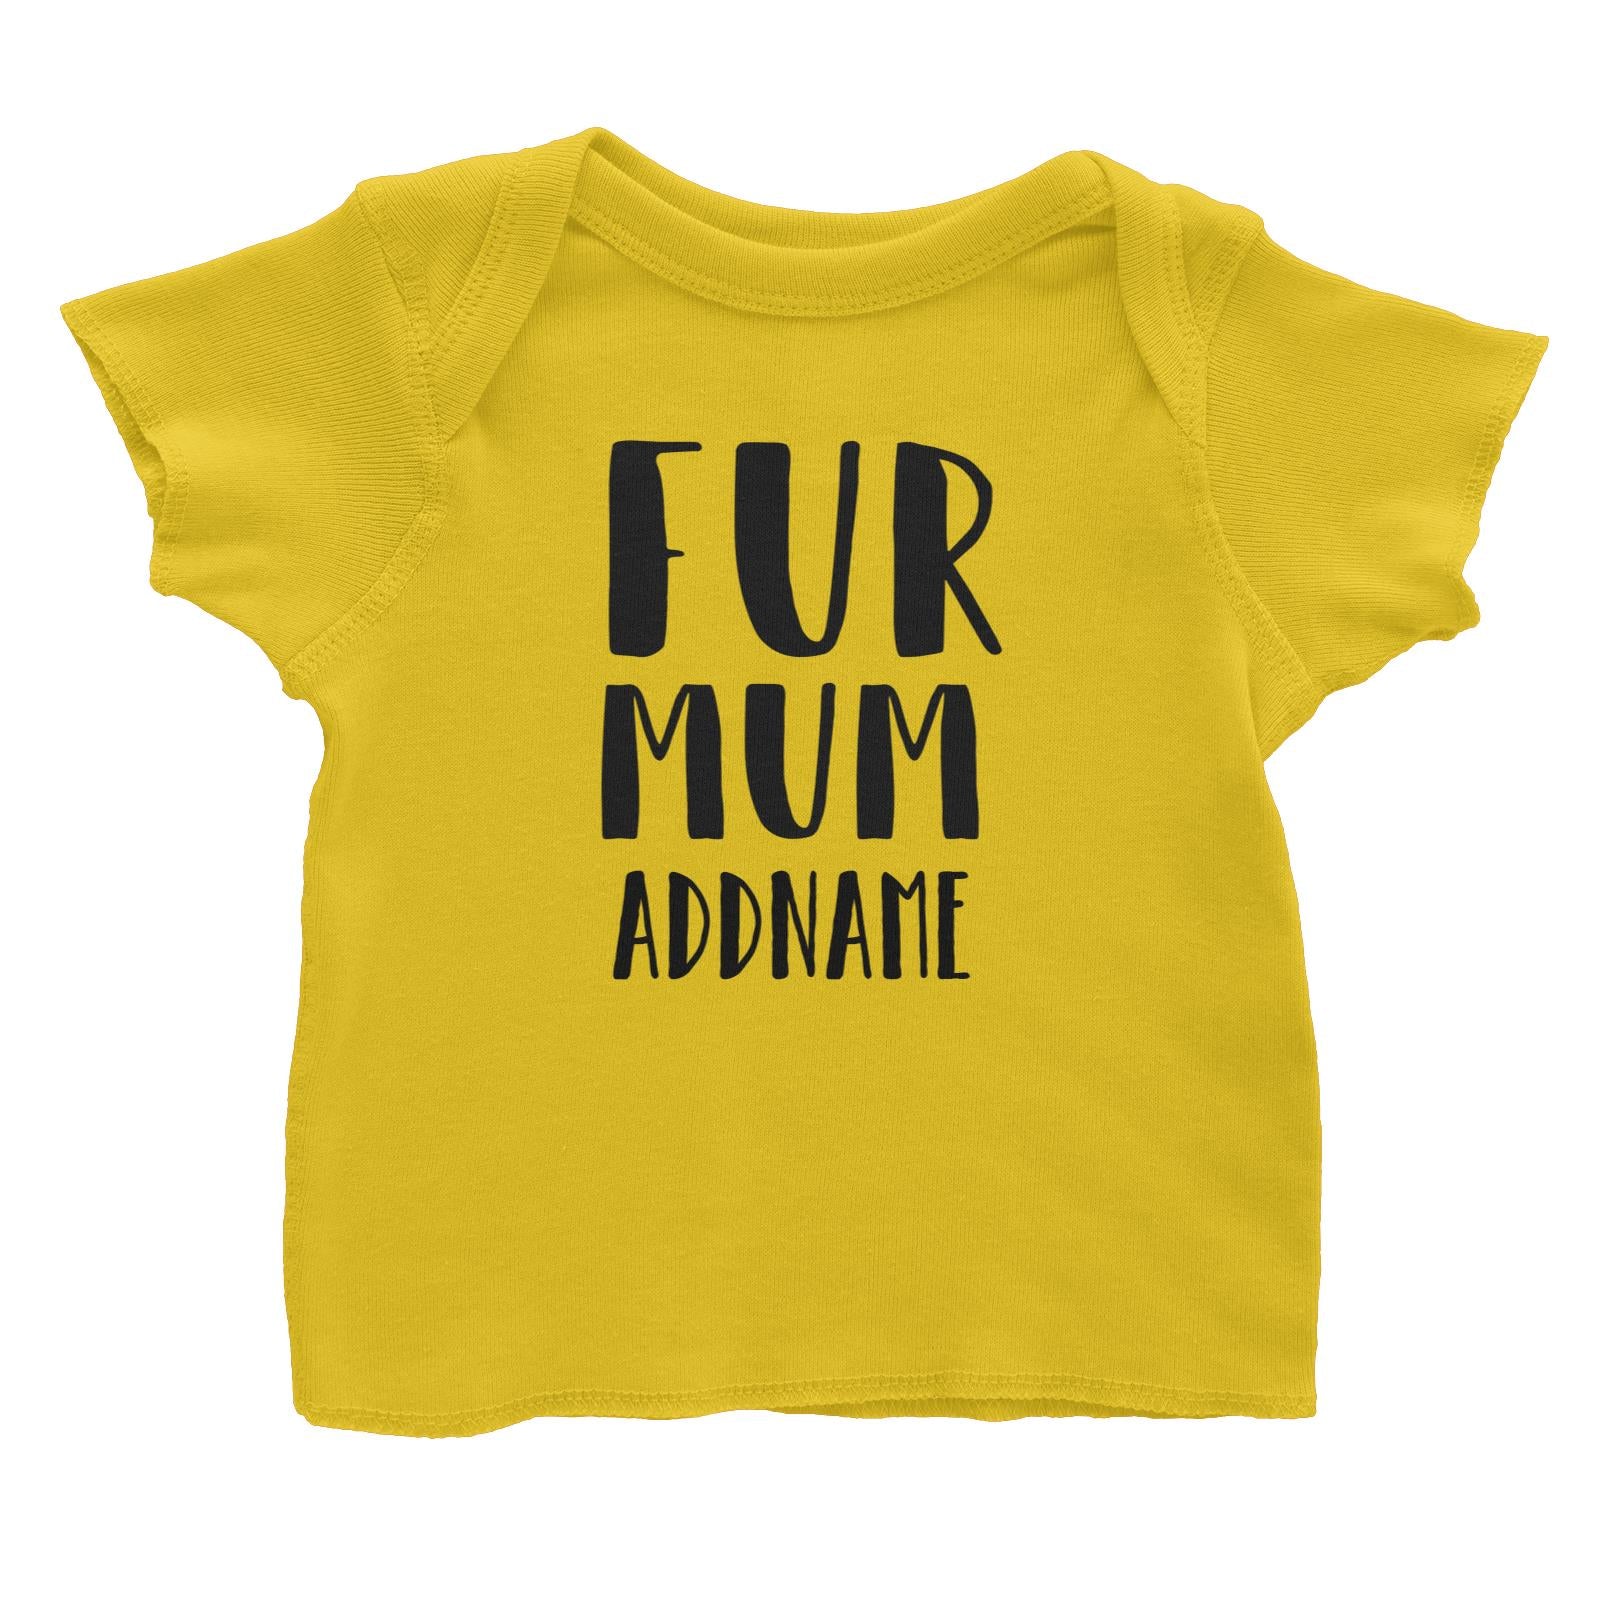 Matching Dog And Owner Fur Mum Family Addname Baby T-Shirt